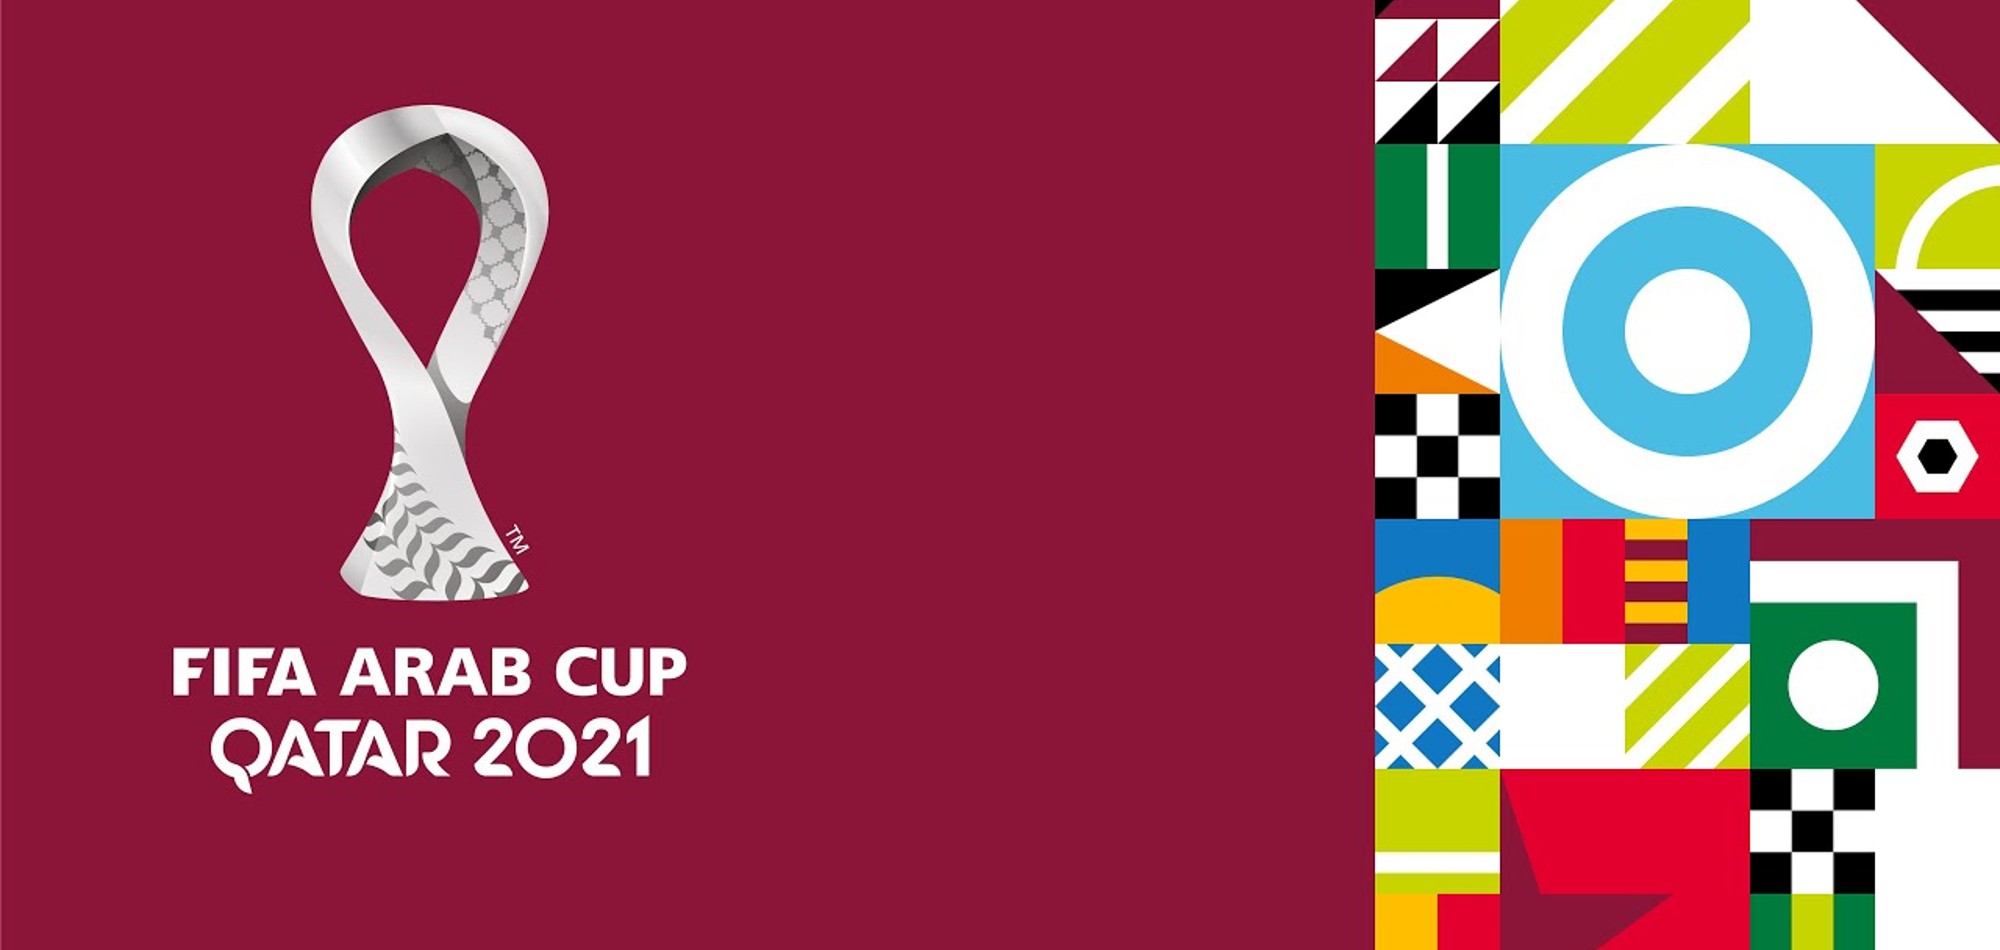 All you need to know about the upcoming FIFA Arab Cup Qatar 2021